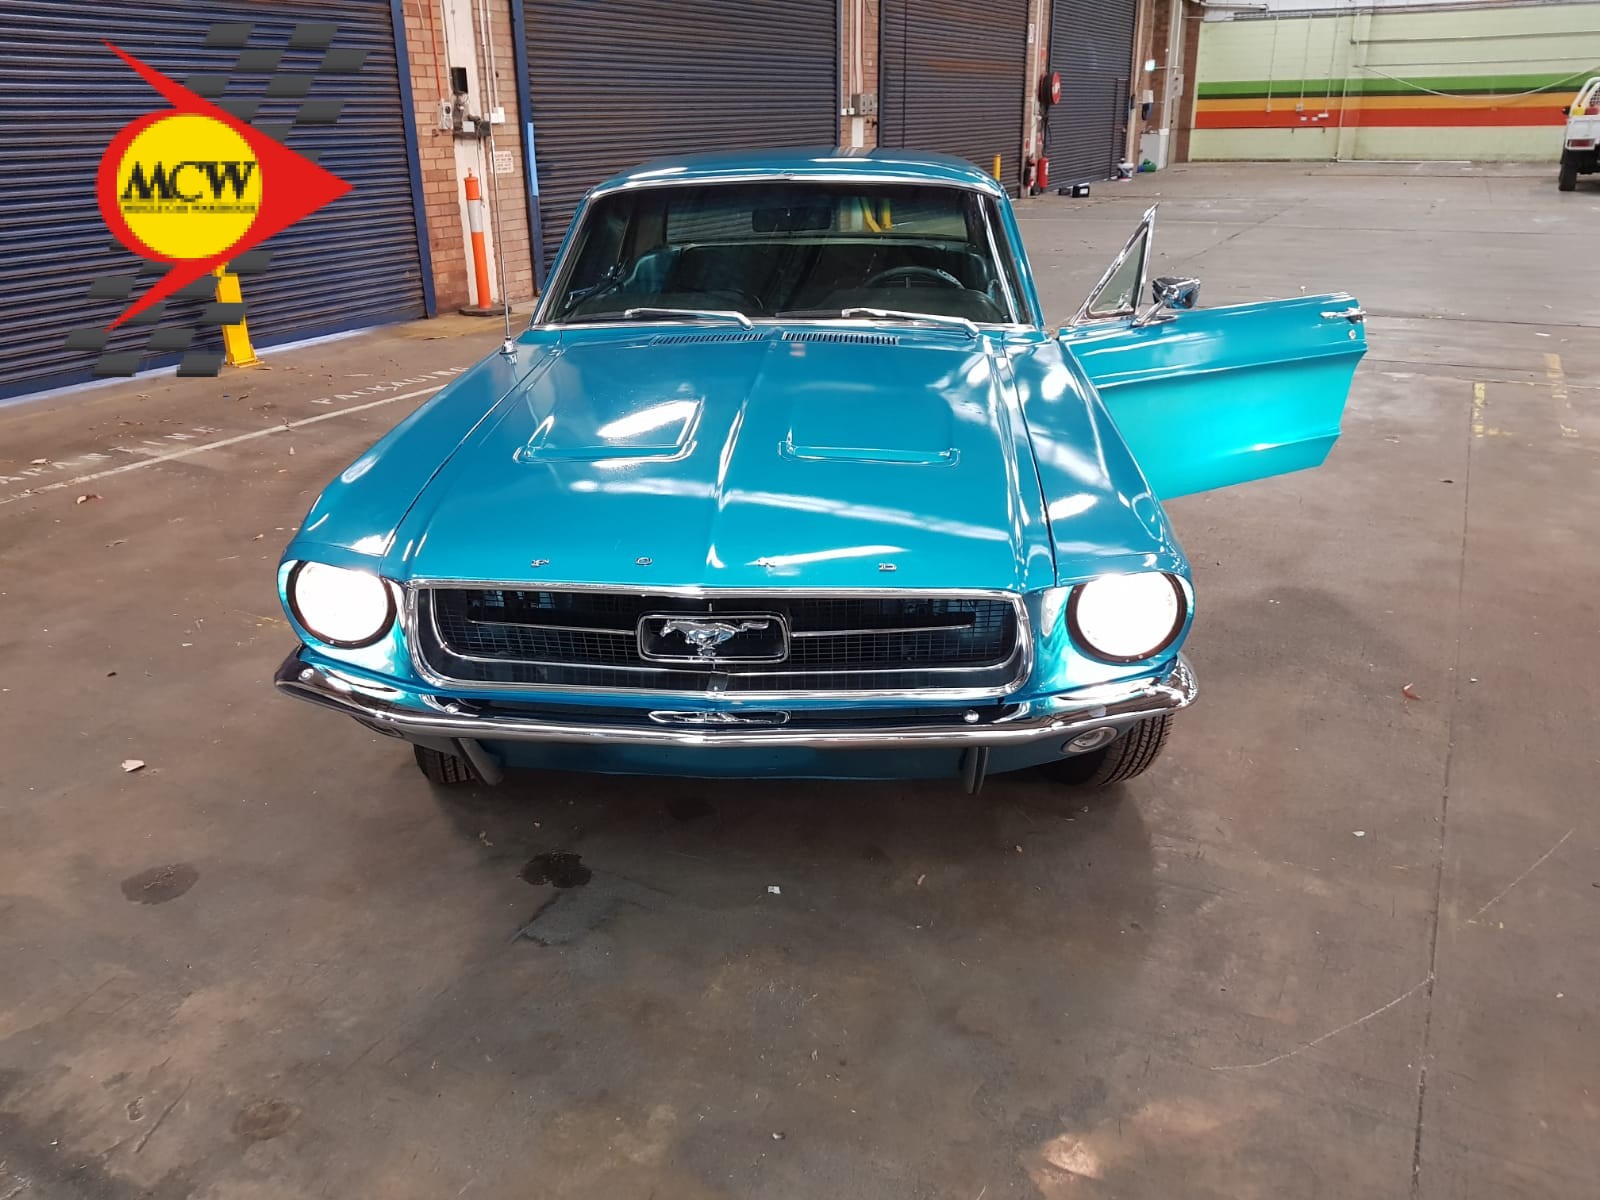 Ford Mustang 1967 Coupe | Muscle Car Warehouse